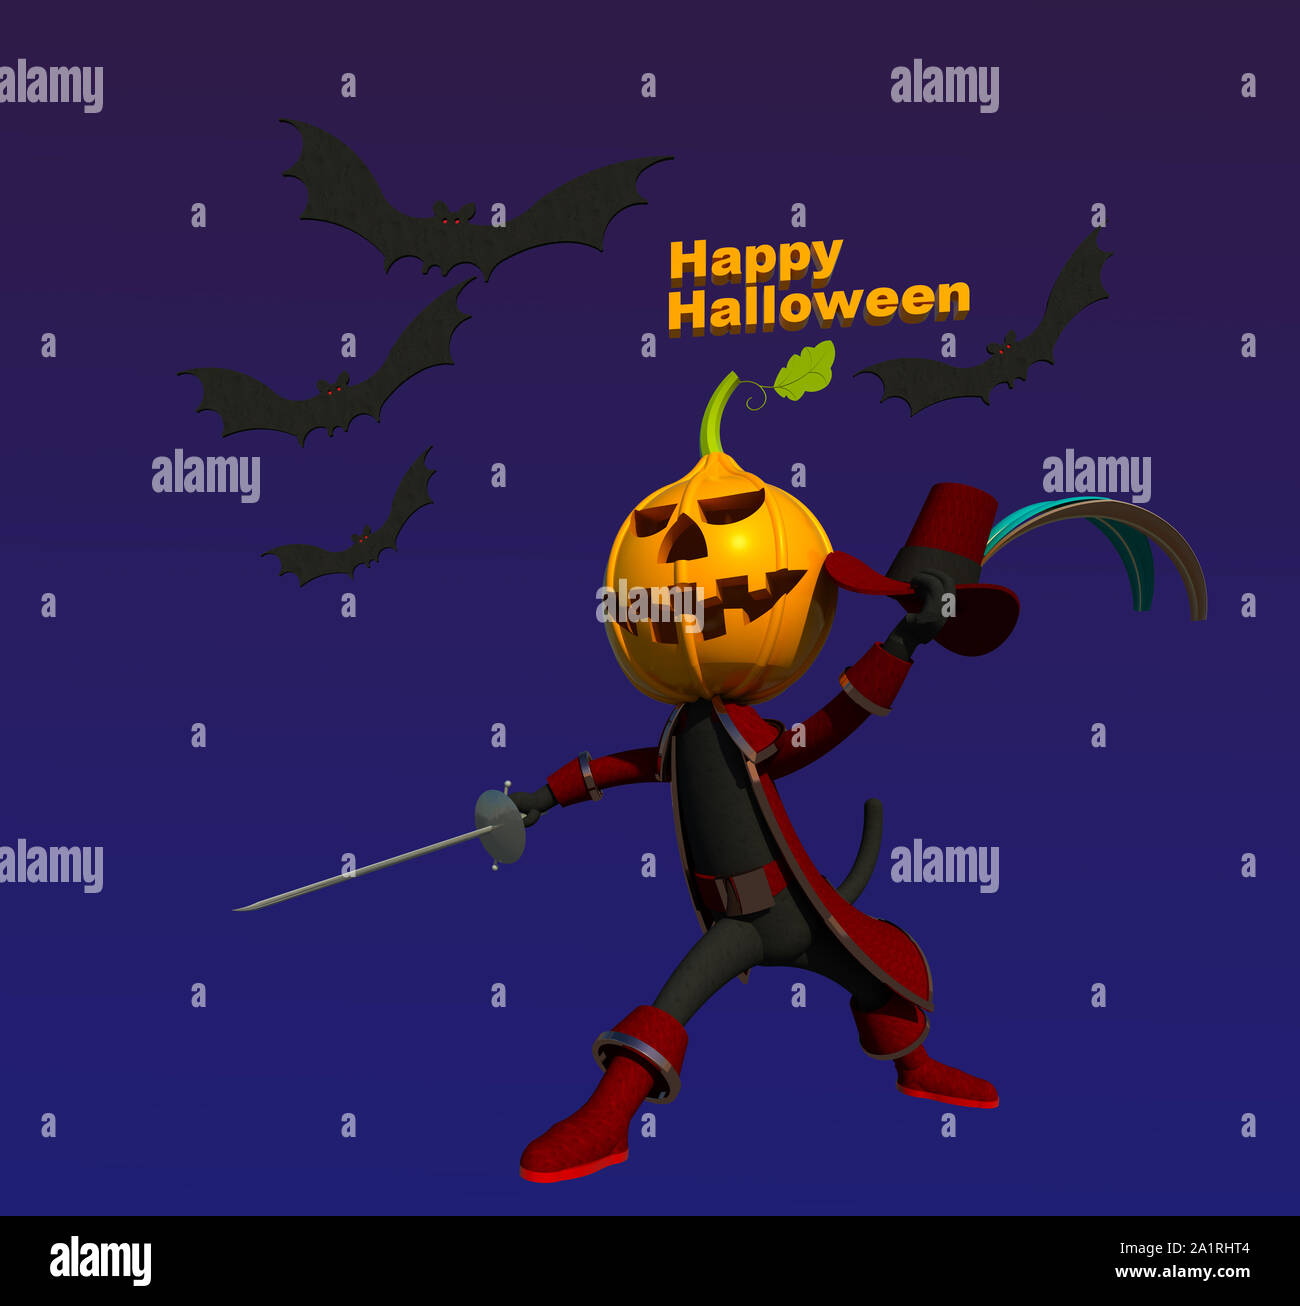 Halloween puss in boots 3D illustration 2. A black cat character with pumpkin lantern head, holding hat and sword, costume disguise. Collection. Stock Photo